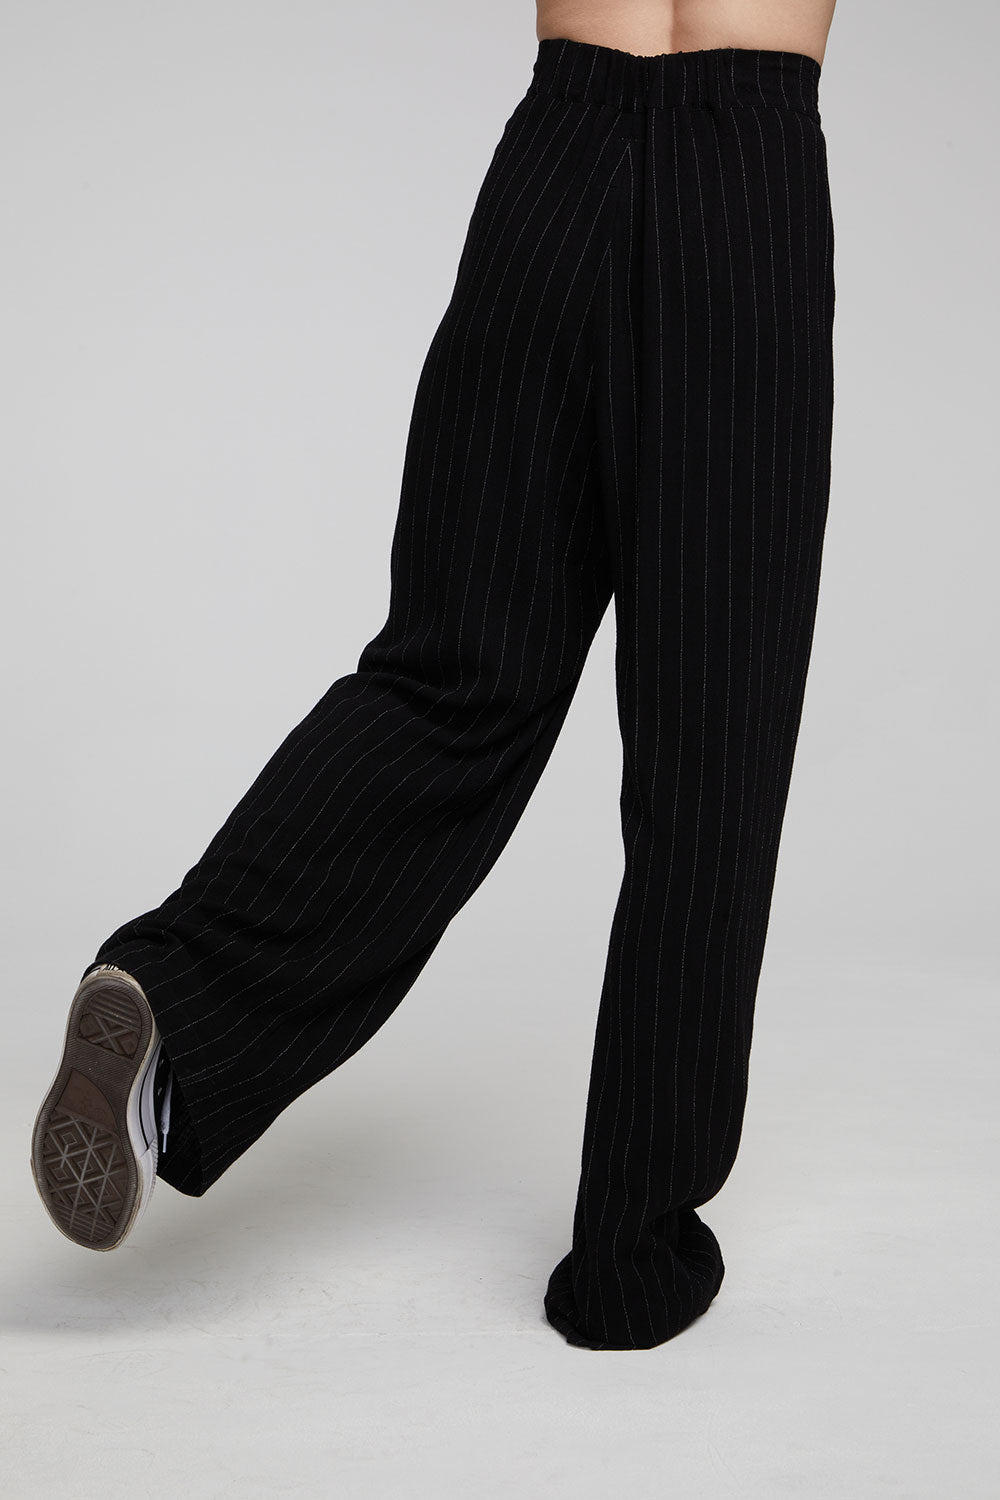 Theo Beverly Pinstripe Trousers